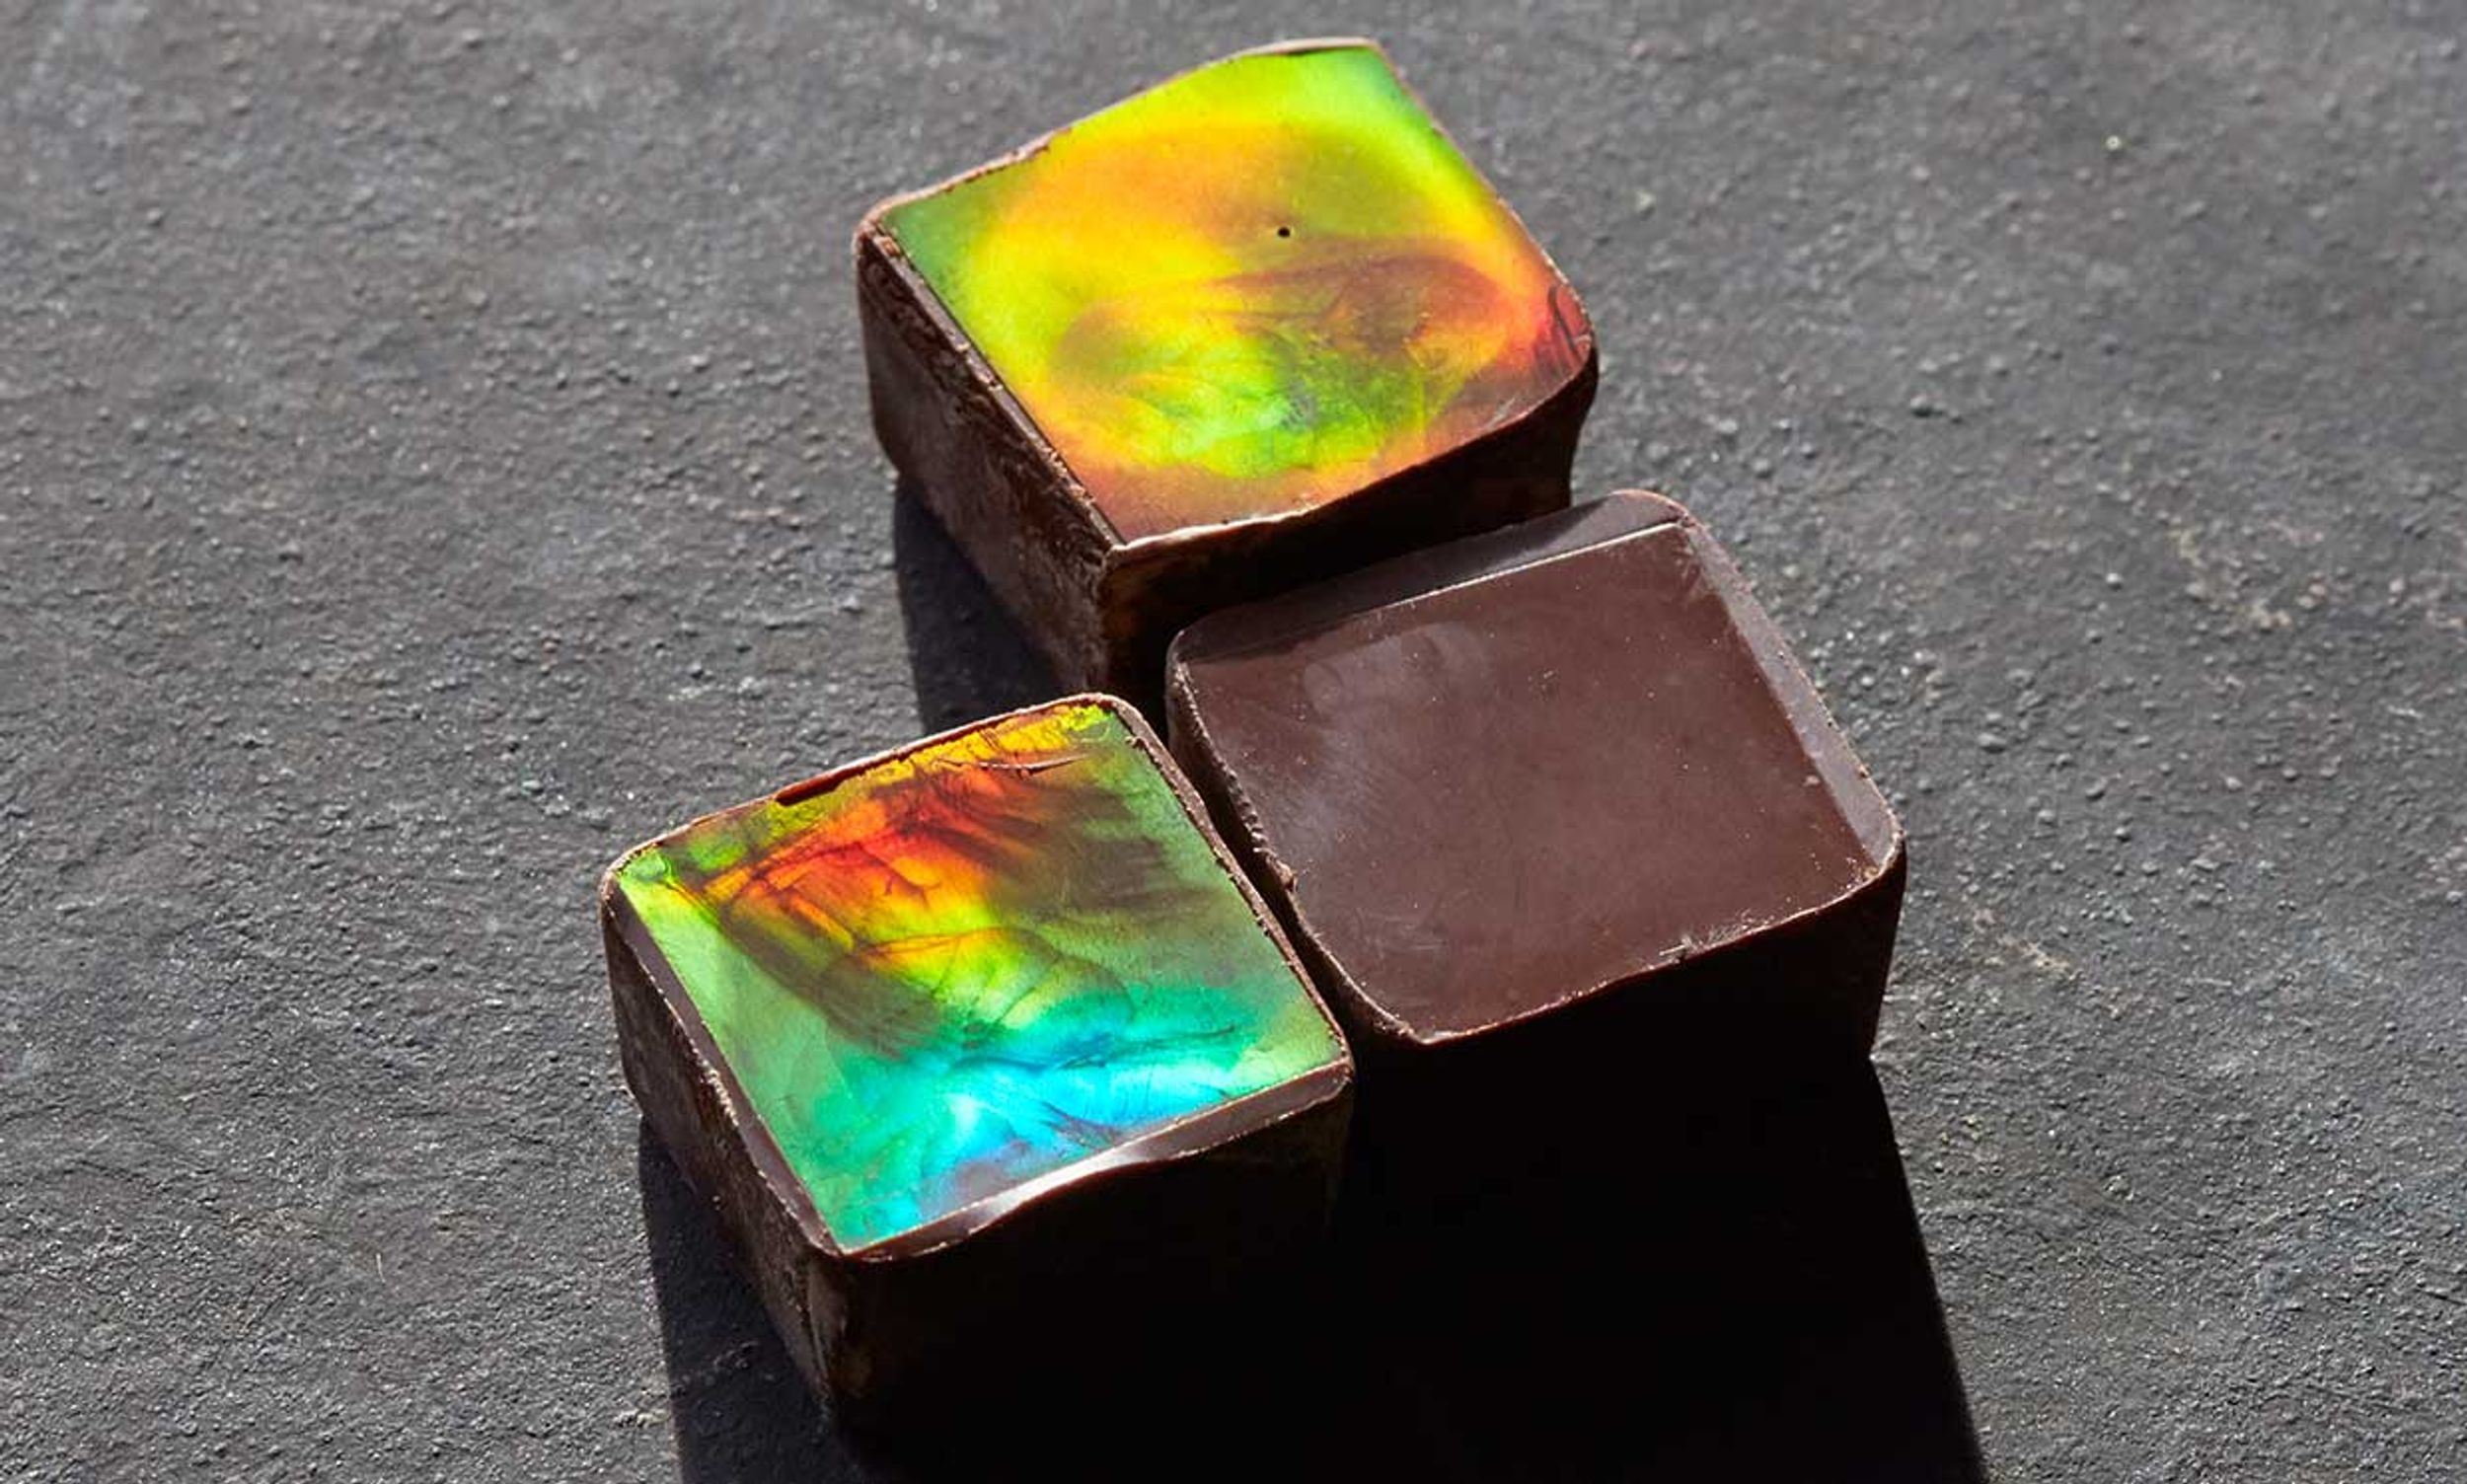 3 pieces of chocolate shimmer due to a special surface imprint that produces what the scientists refer to as a structural colour.